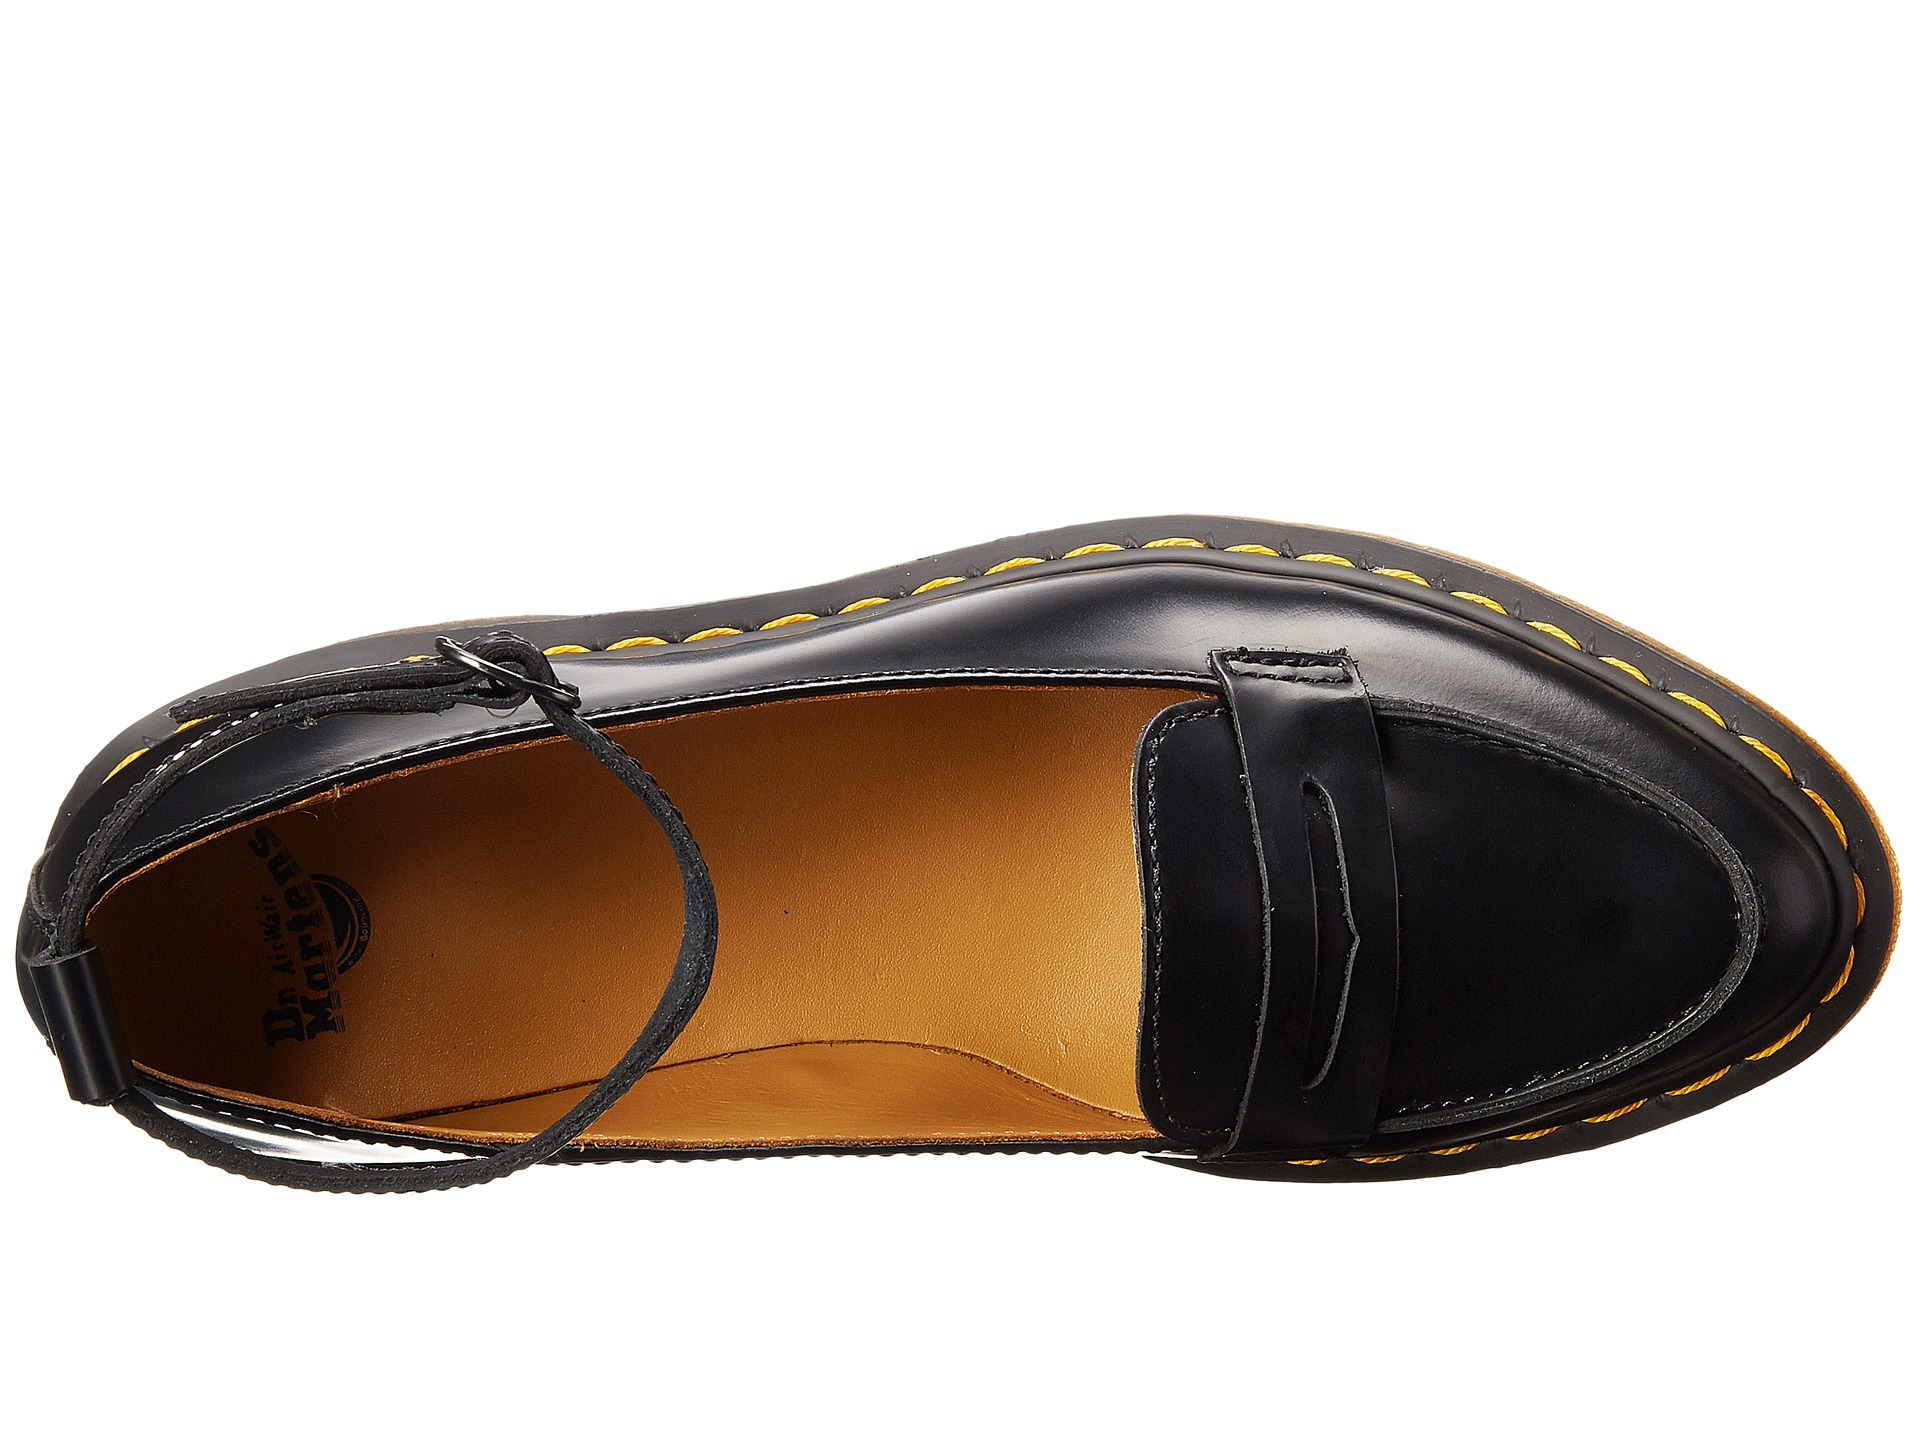 Dr. Martens Leonie Pointed Ankle Strap Penny Loafer in Black | Lyst